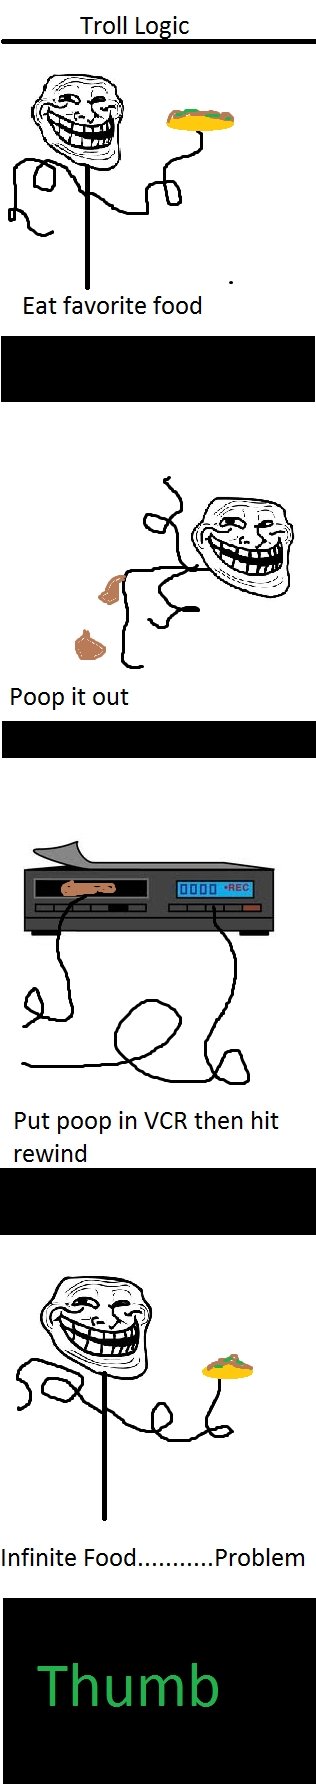 Troll Logic. Its amazing. Troll Luge Eat favorite food Poop it out Put poop in VCR then hit rewind. but if you like Ethiopian food then there is no point